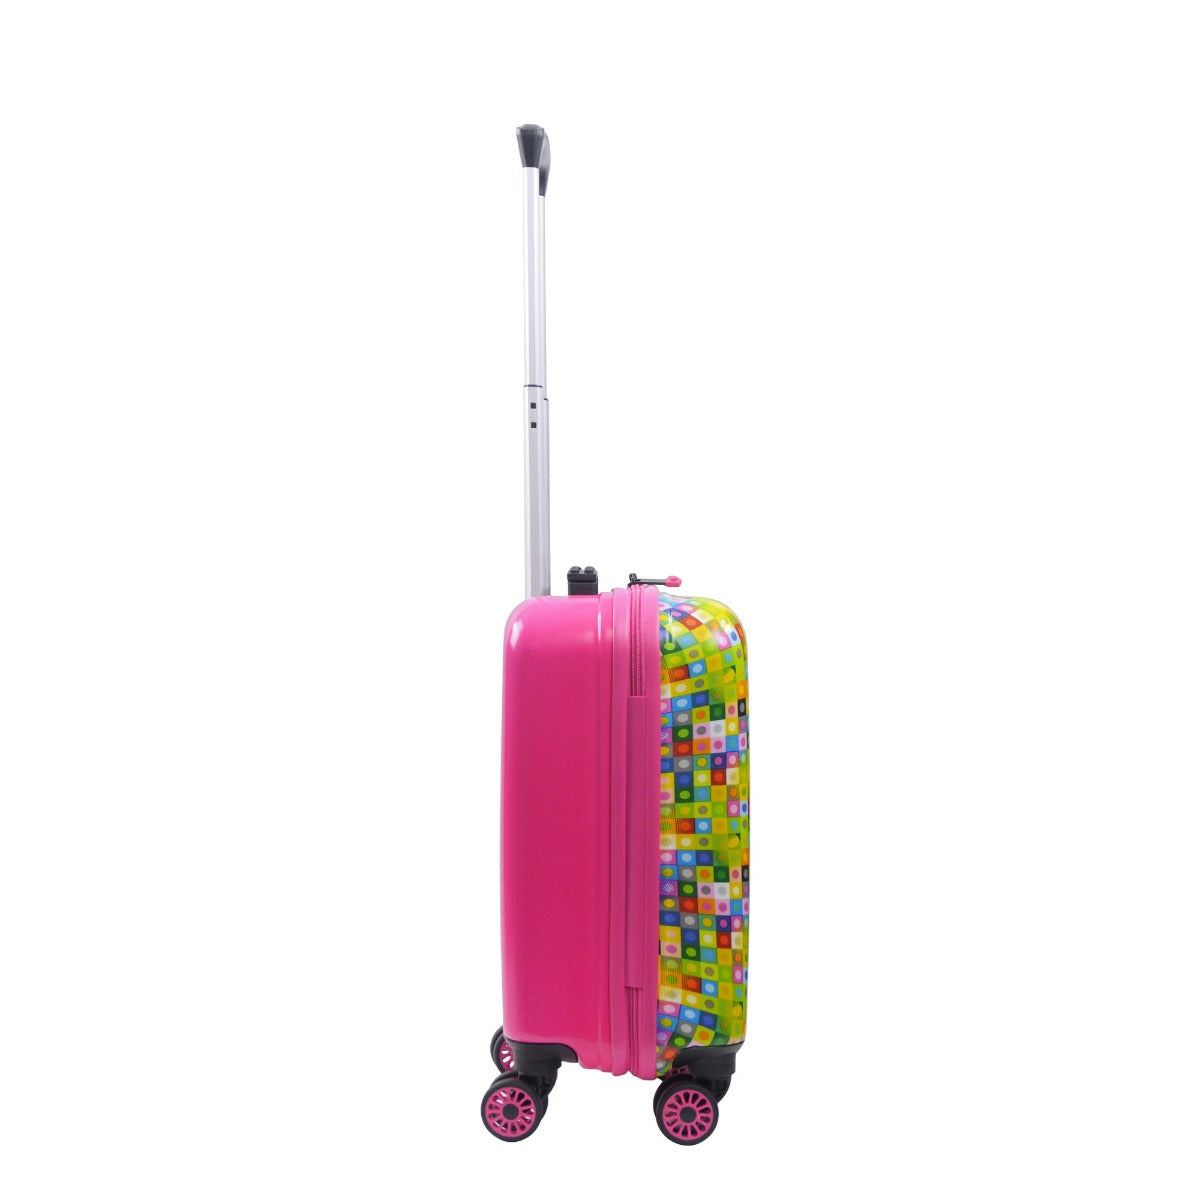 Pink Lego Play Date Hey Minifigures 18" luggage - best carry-on spinner suitcase for kids